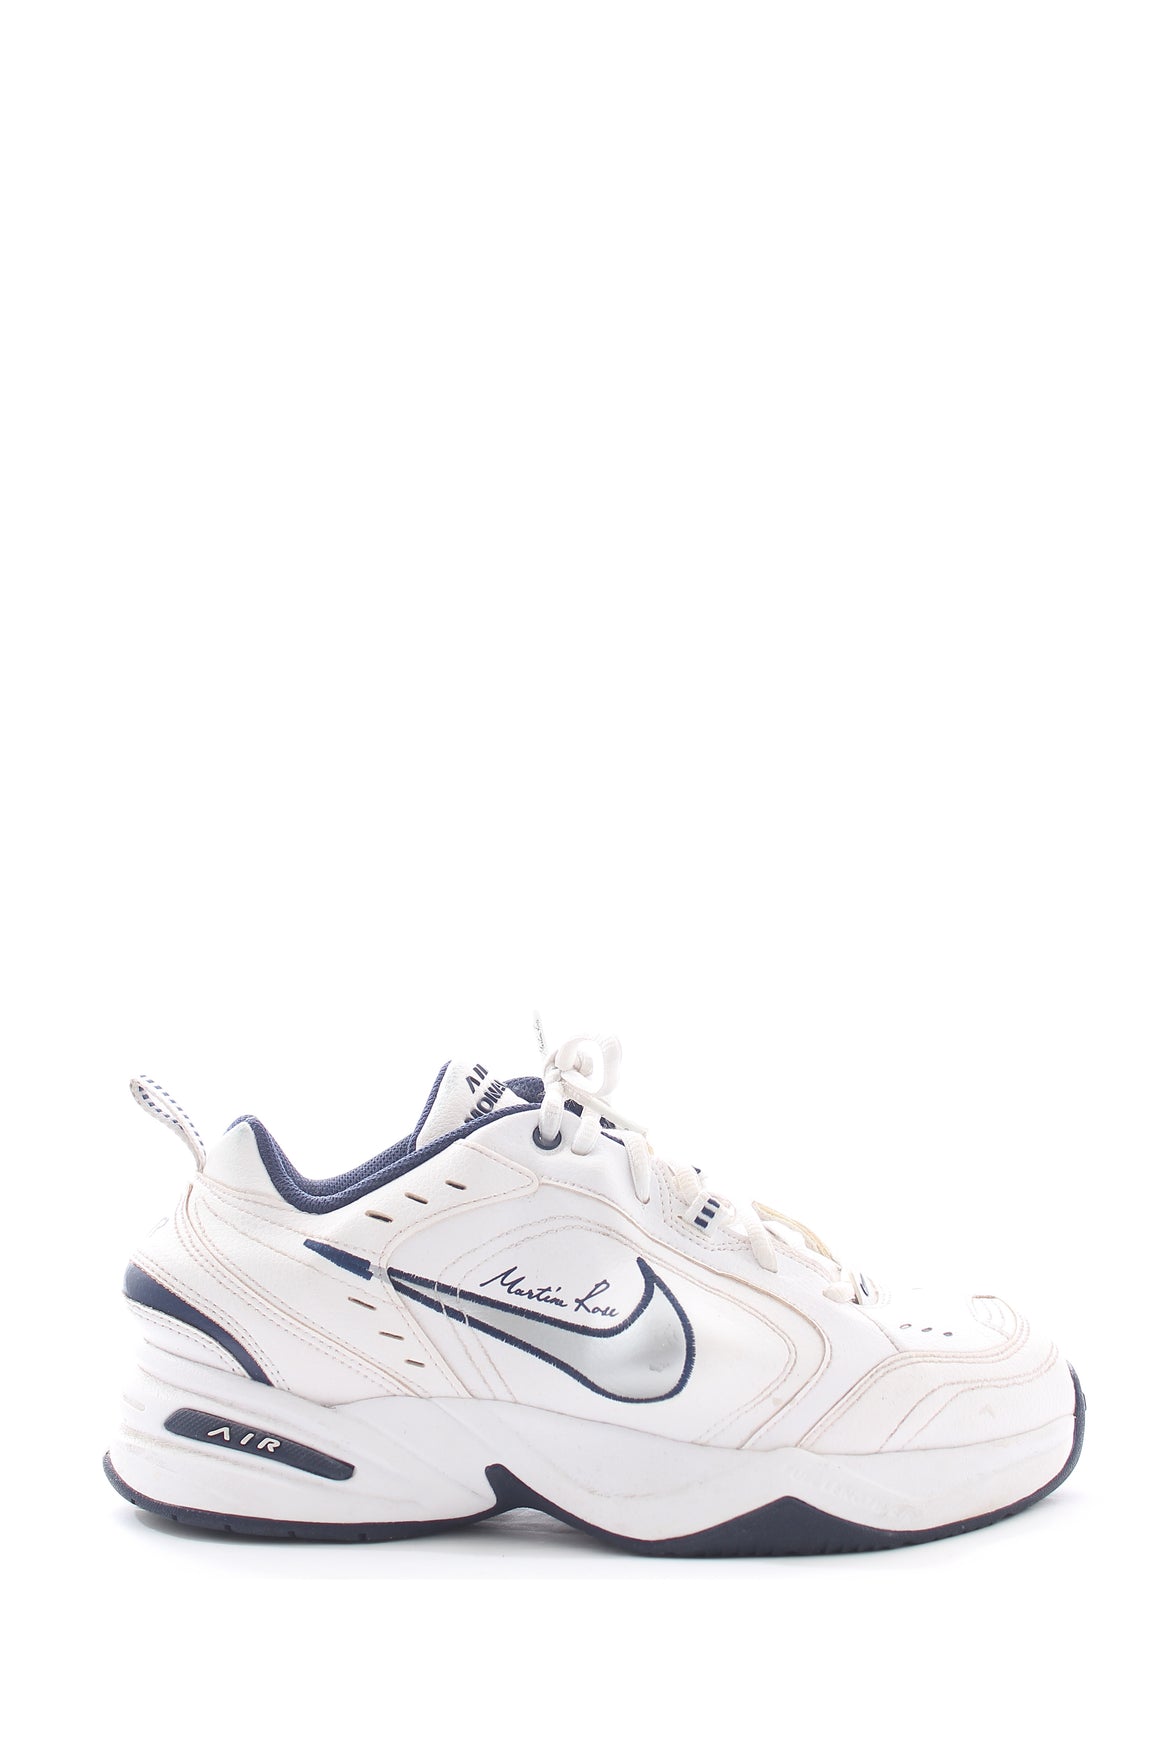 Nike x Martine Rose x Air Monarch IV Leather Sneakers